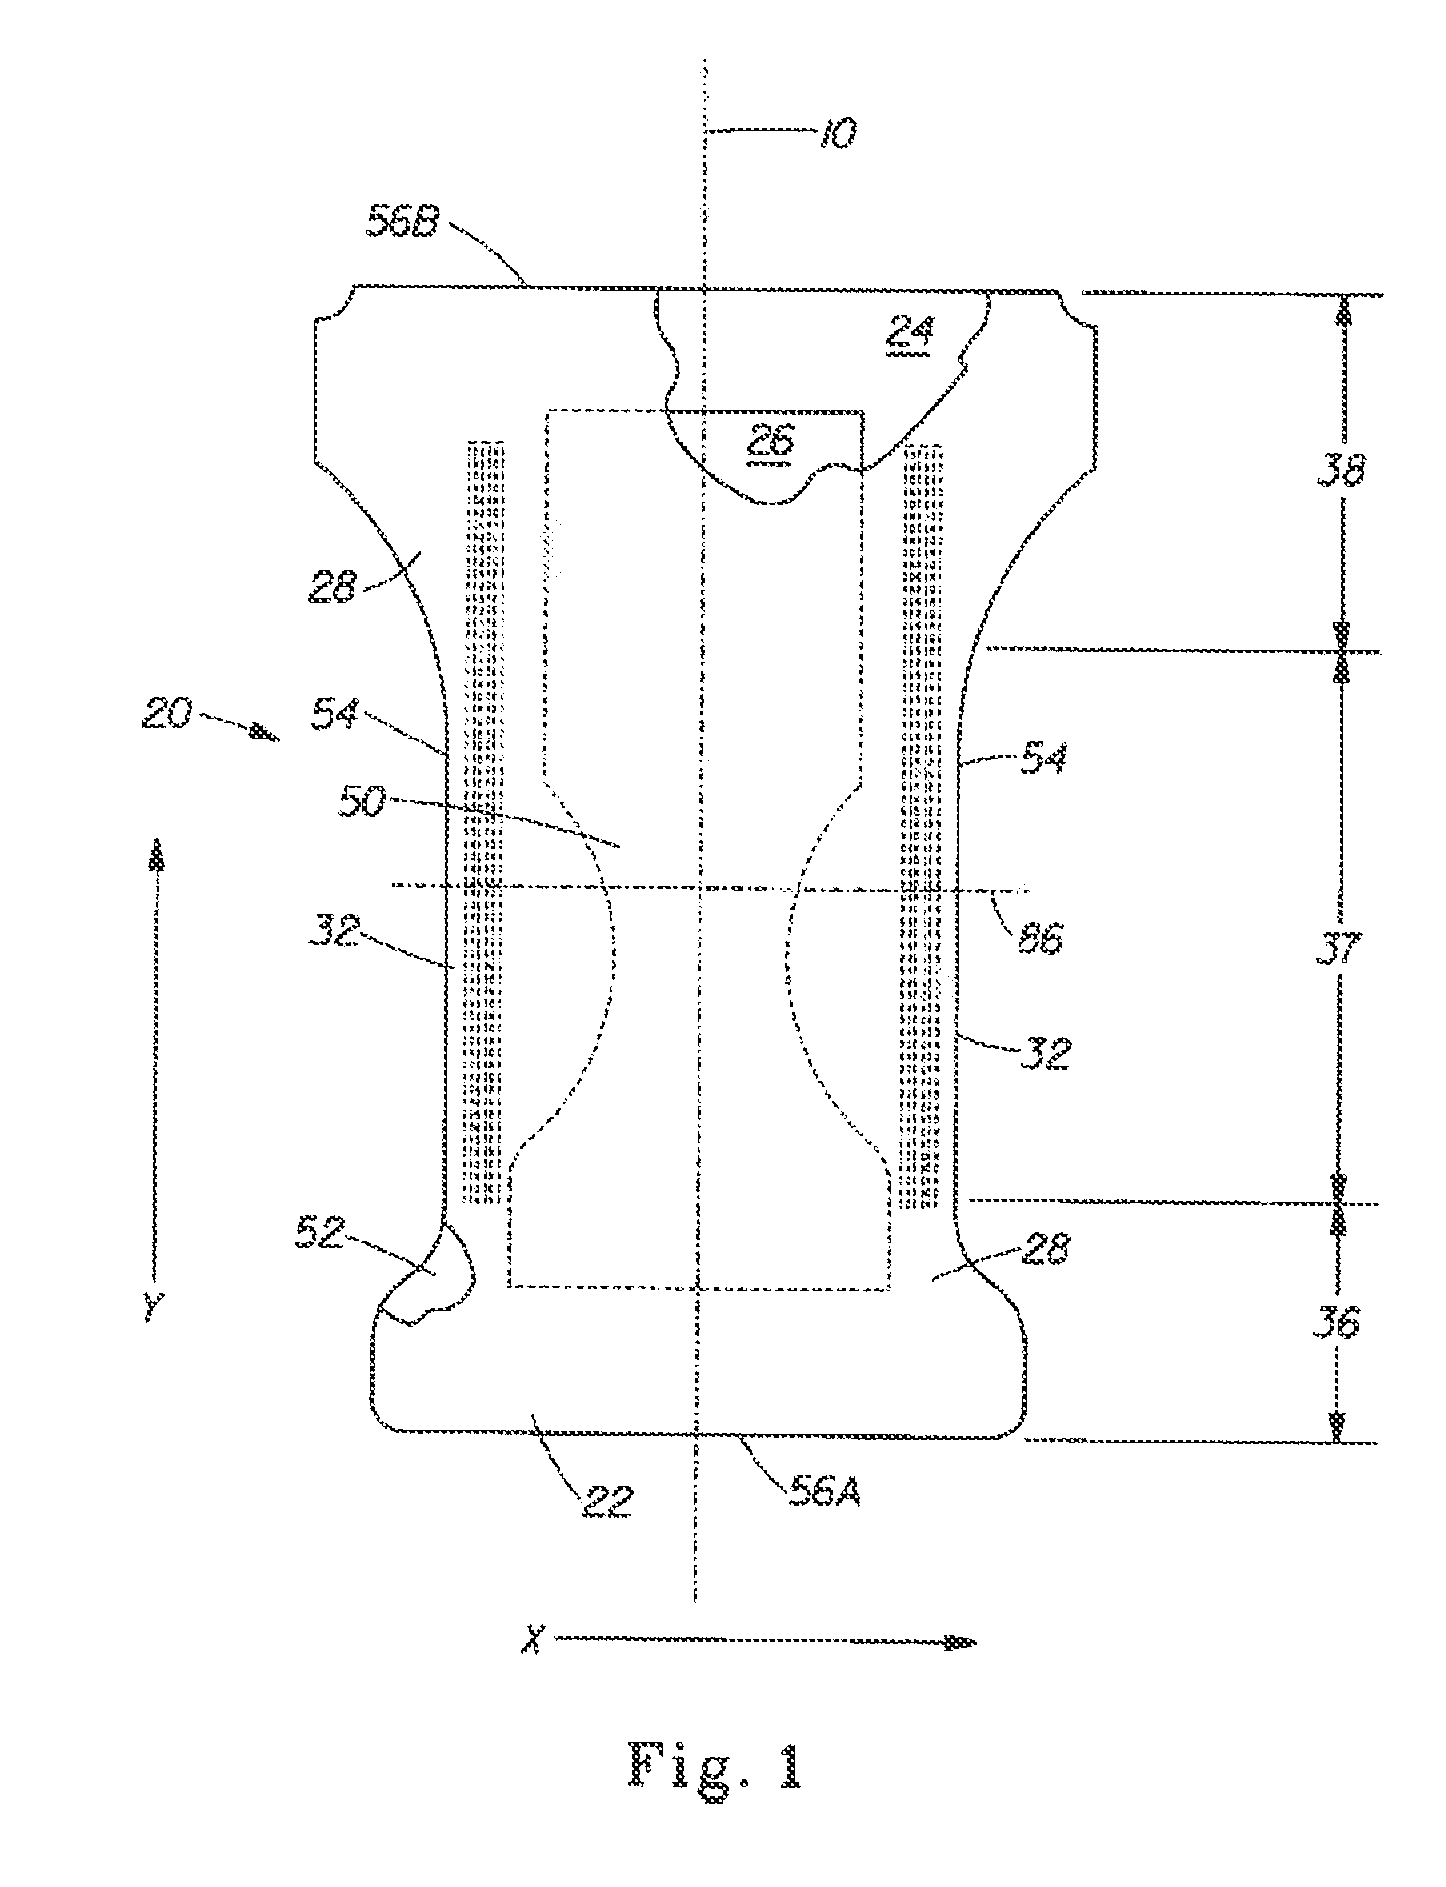 System for Bifolding an Absorbent Article